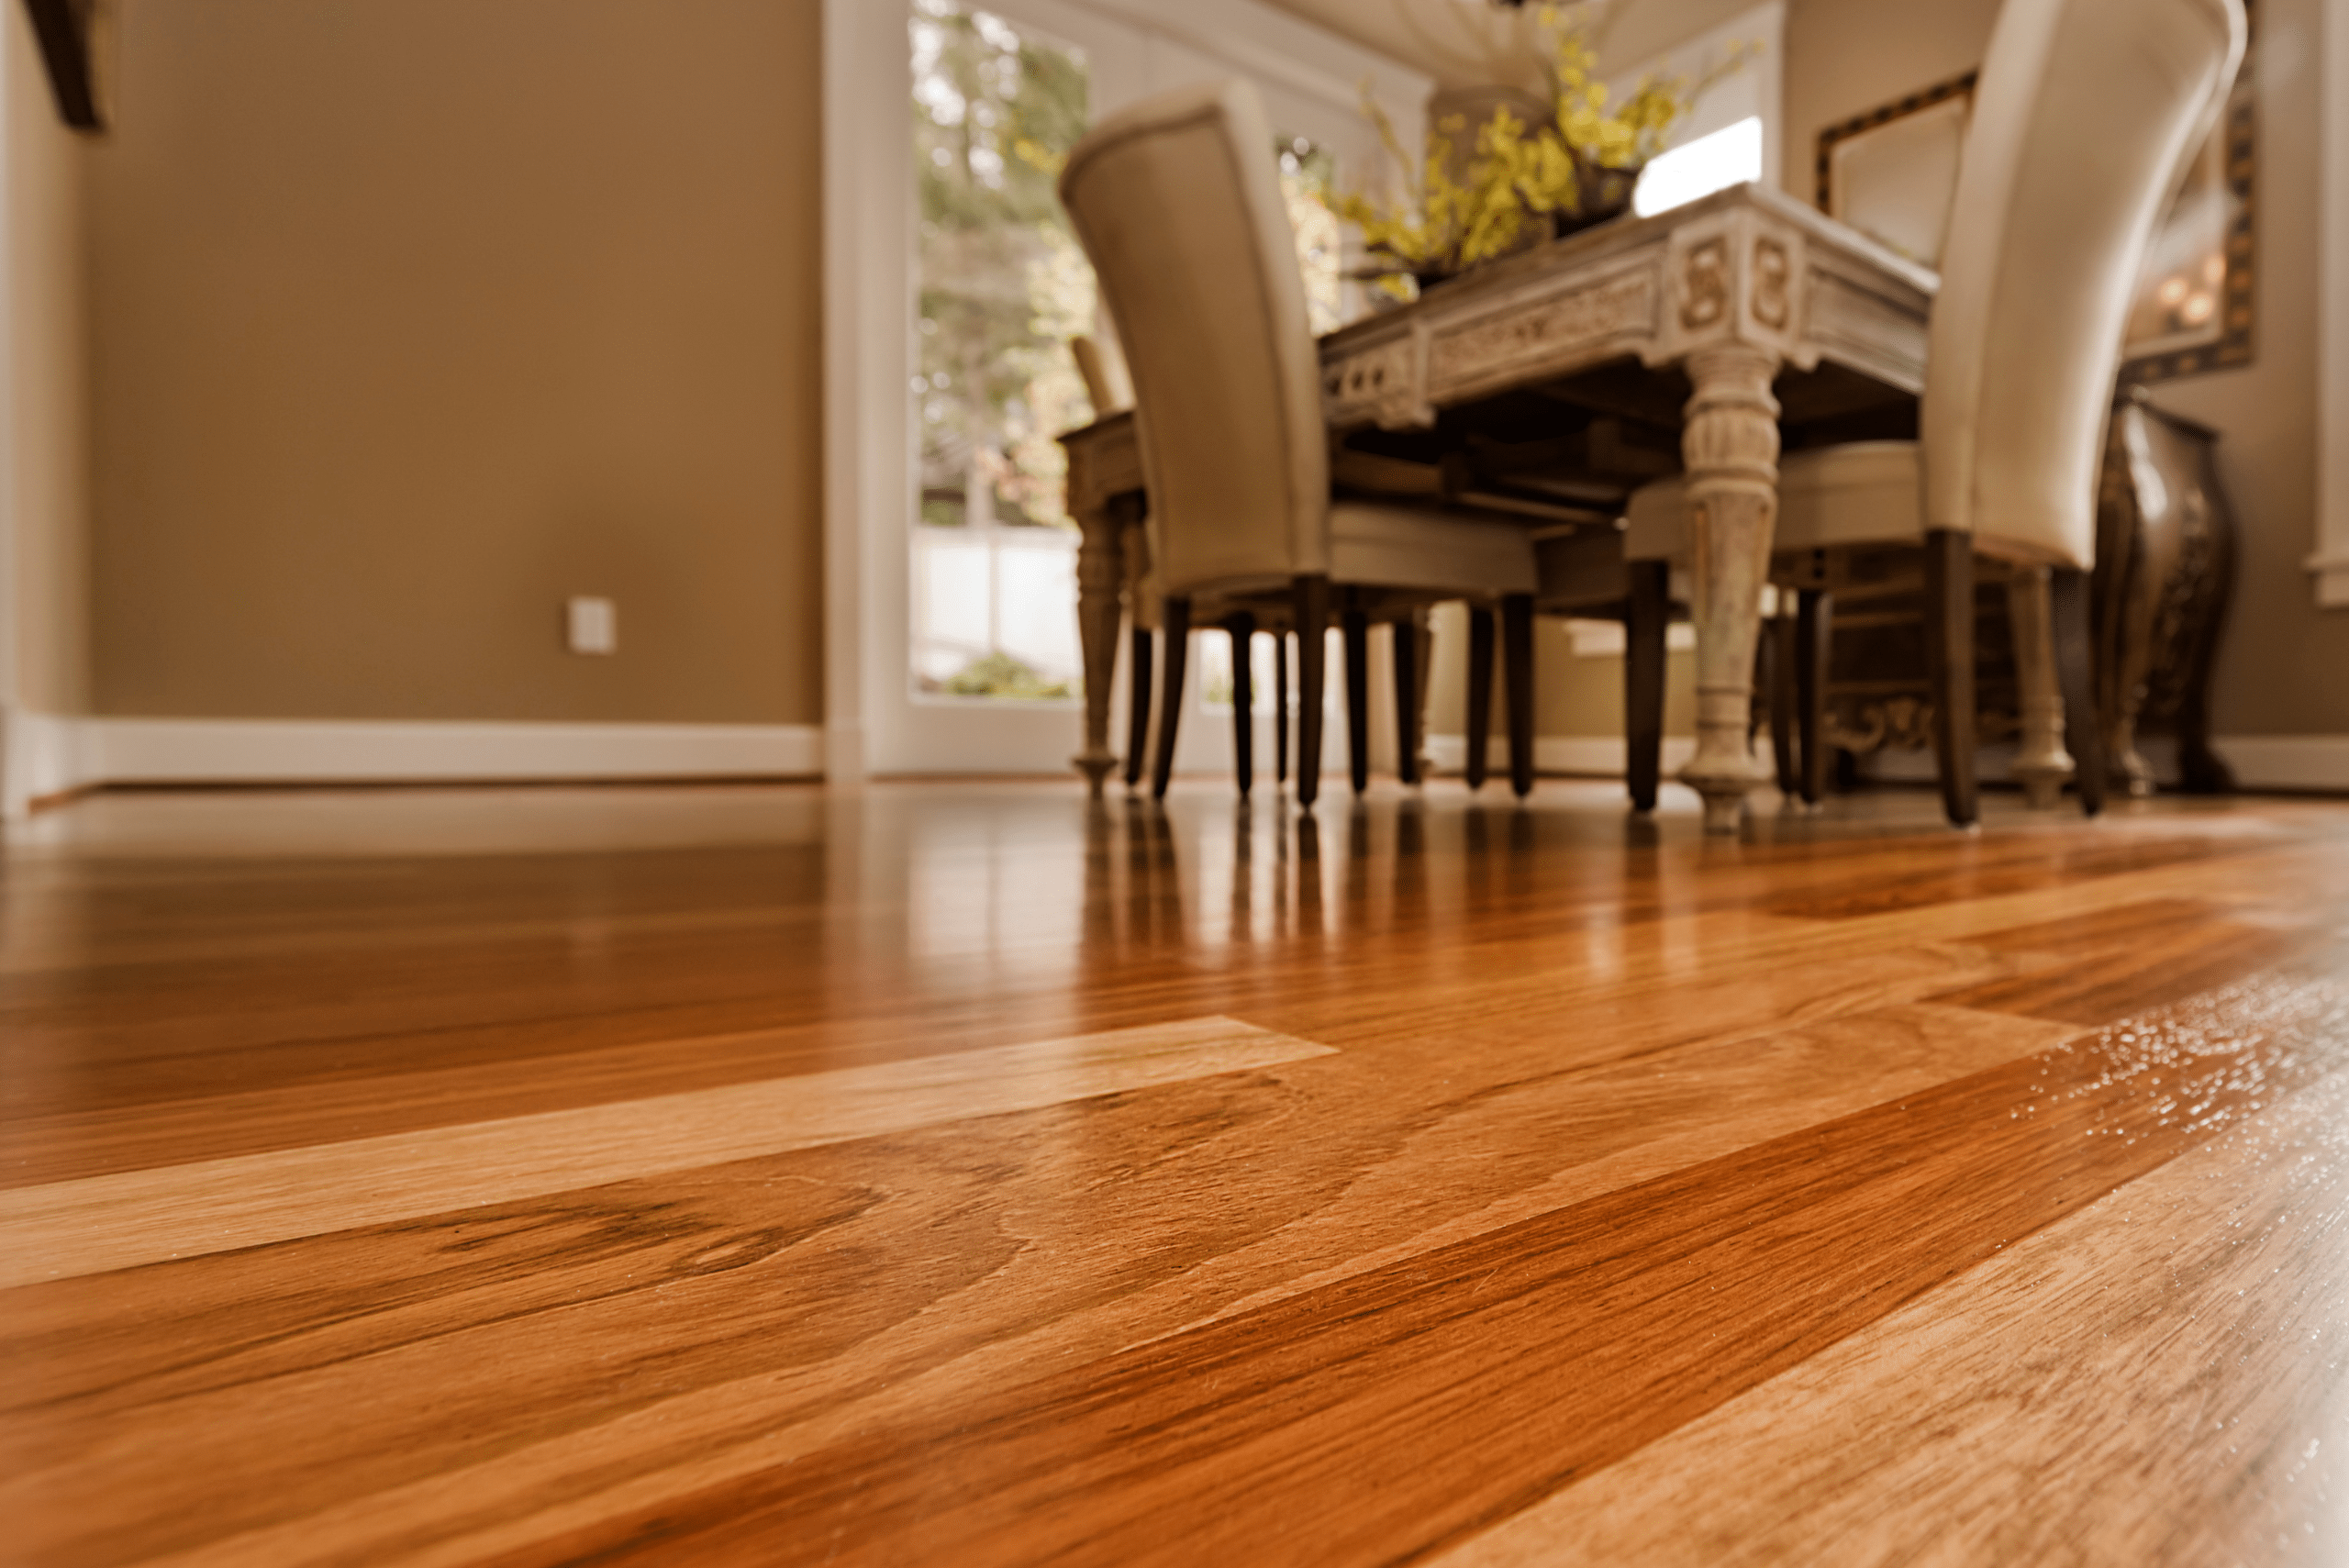 Perfectly restored wooden floors that are shiny.